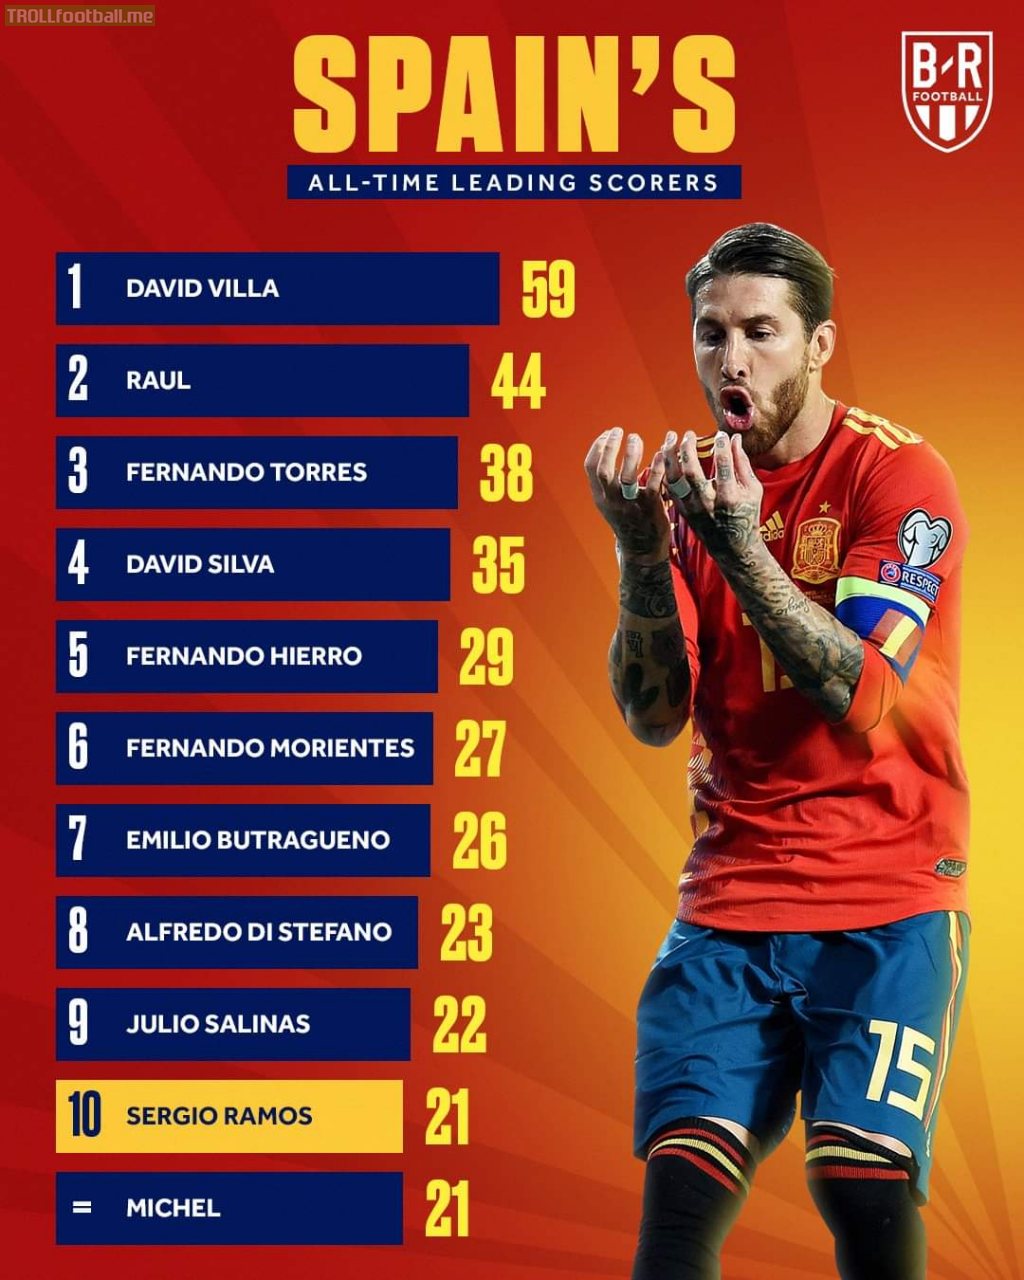 Sergio Ramos just joined the top 10 goal scorers of all time for Spain.